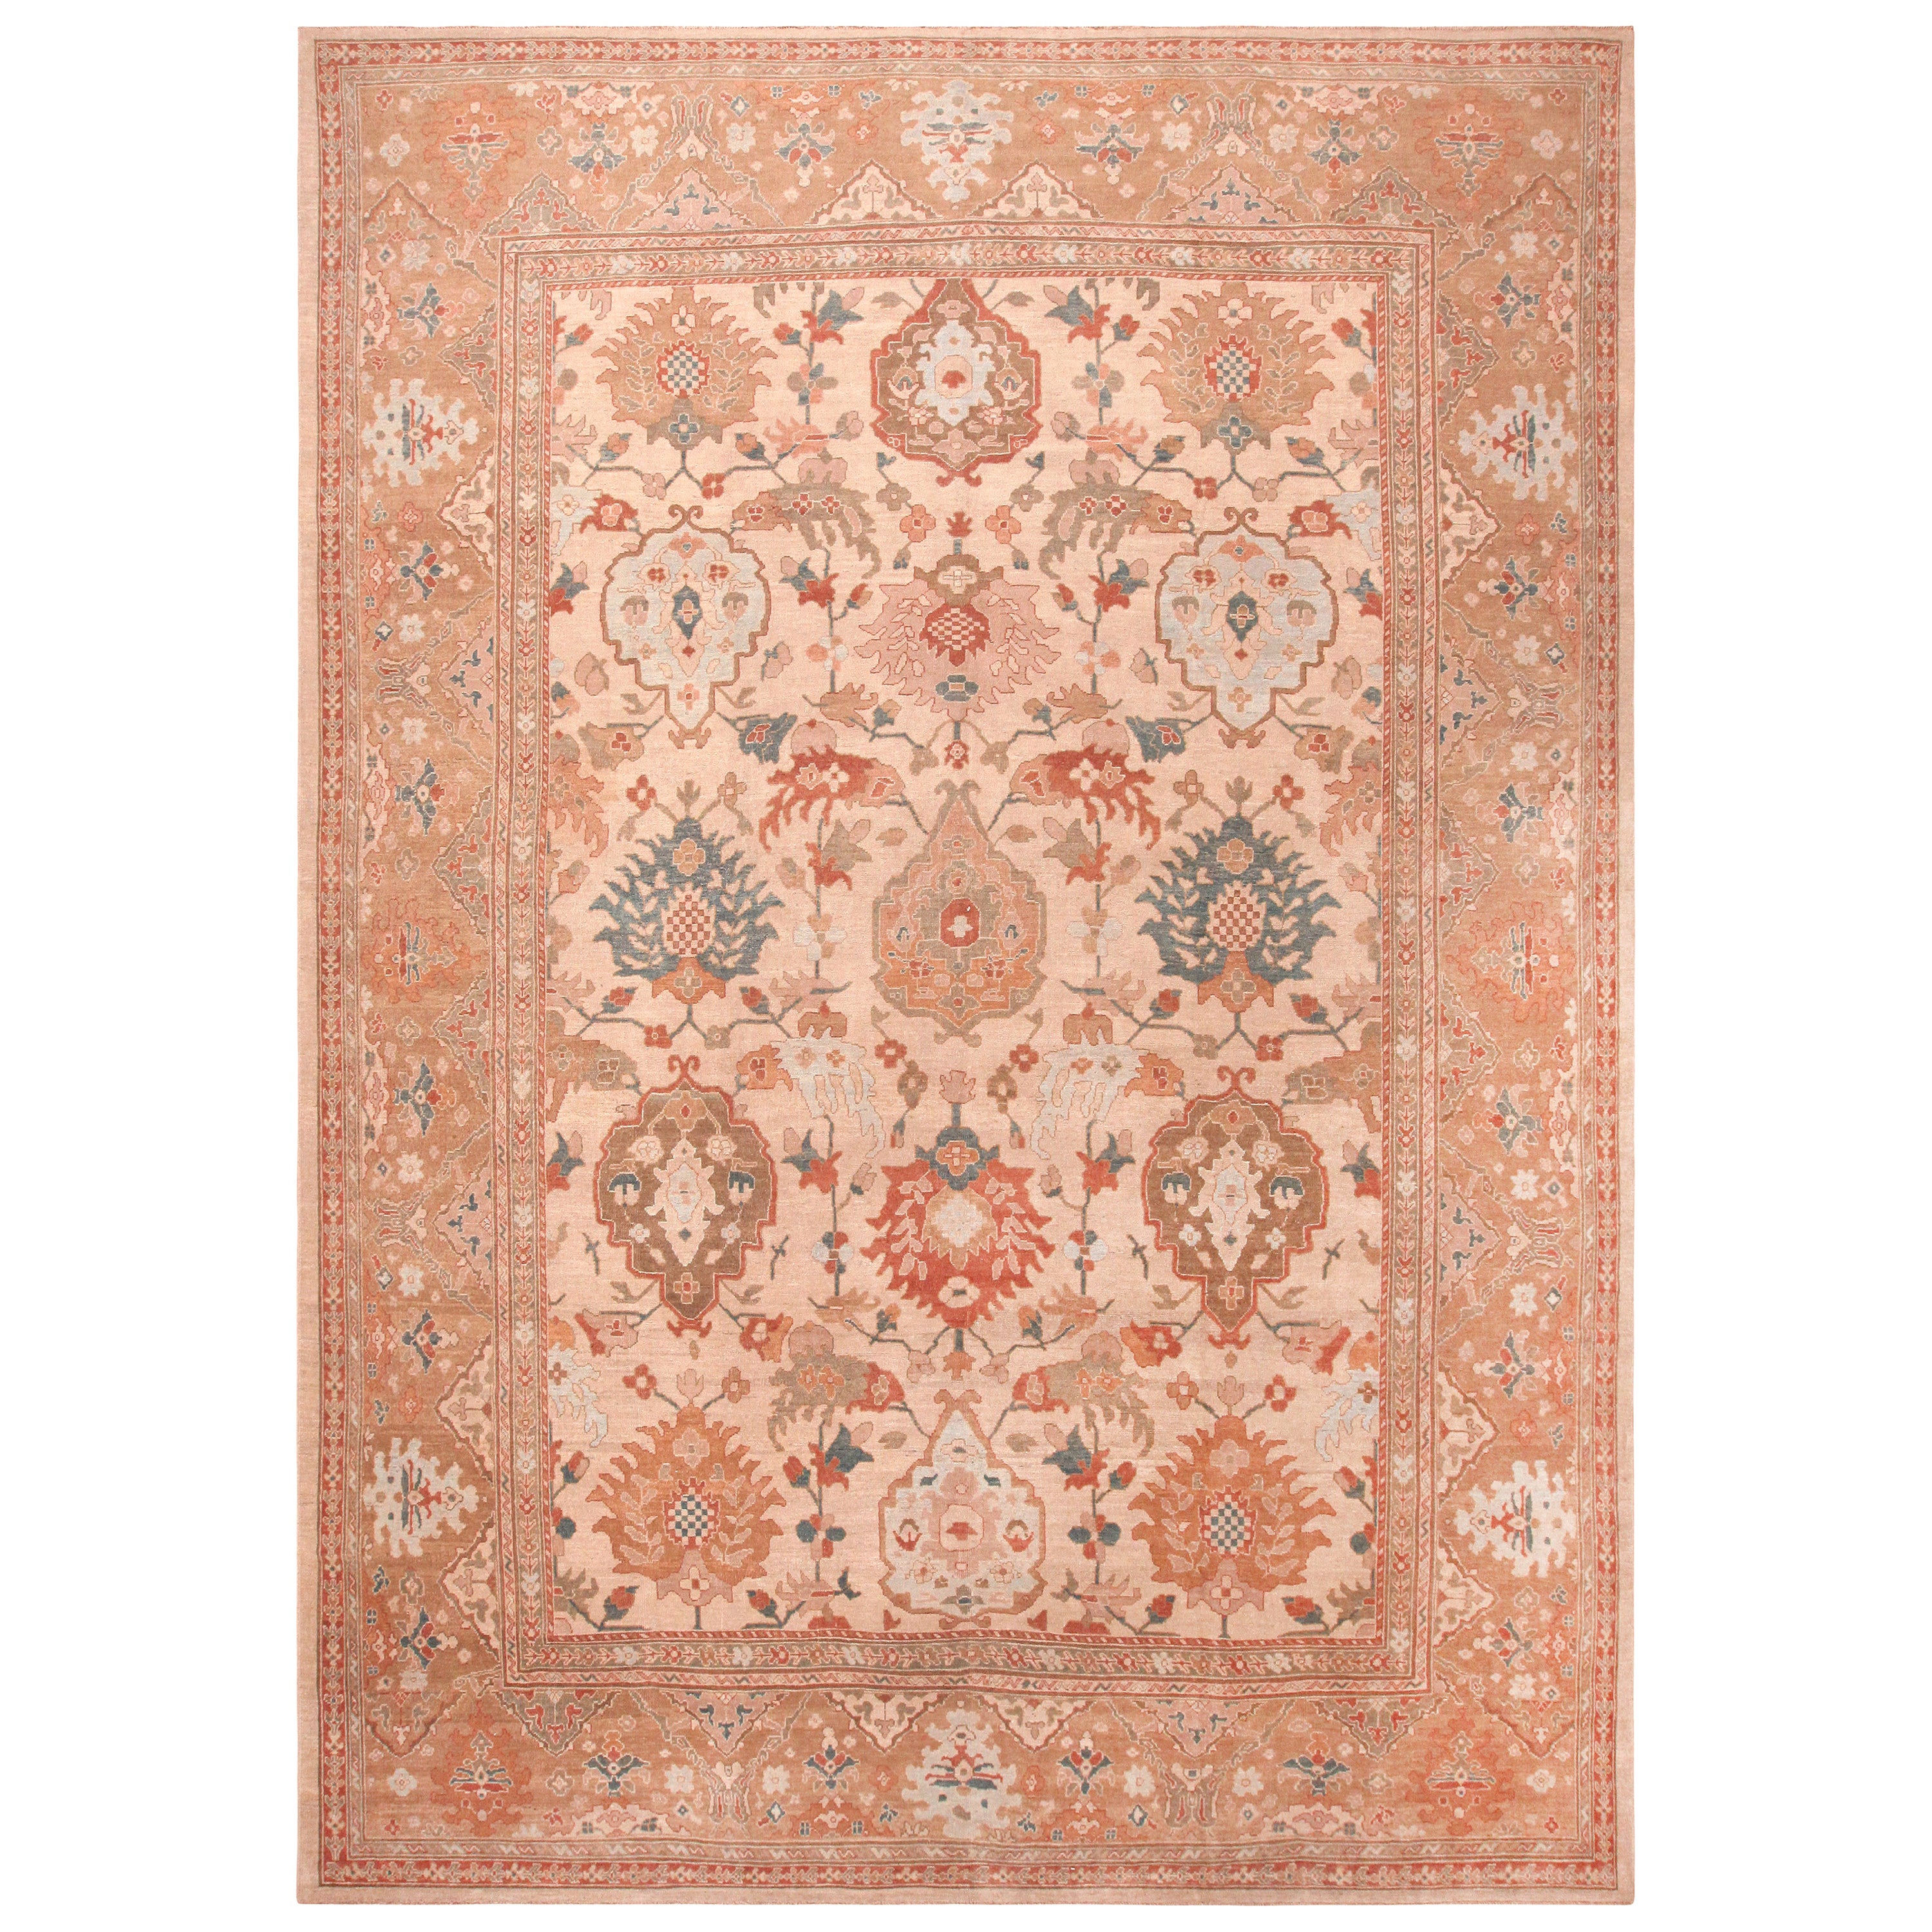 Nazmiyal Collection Large Modern Persian Sultanabad Rug. 12 ft 6 in x 17 ft 6 in